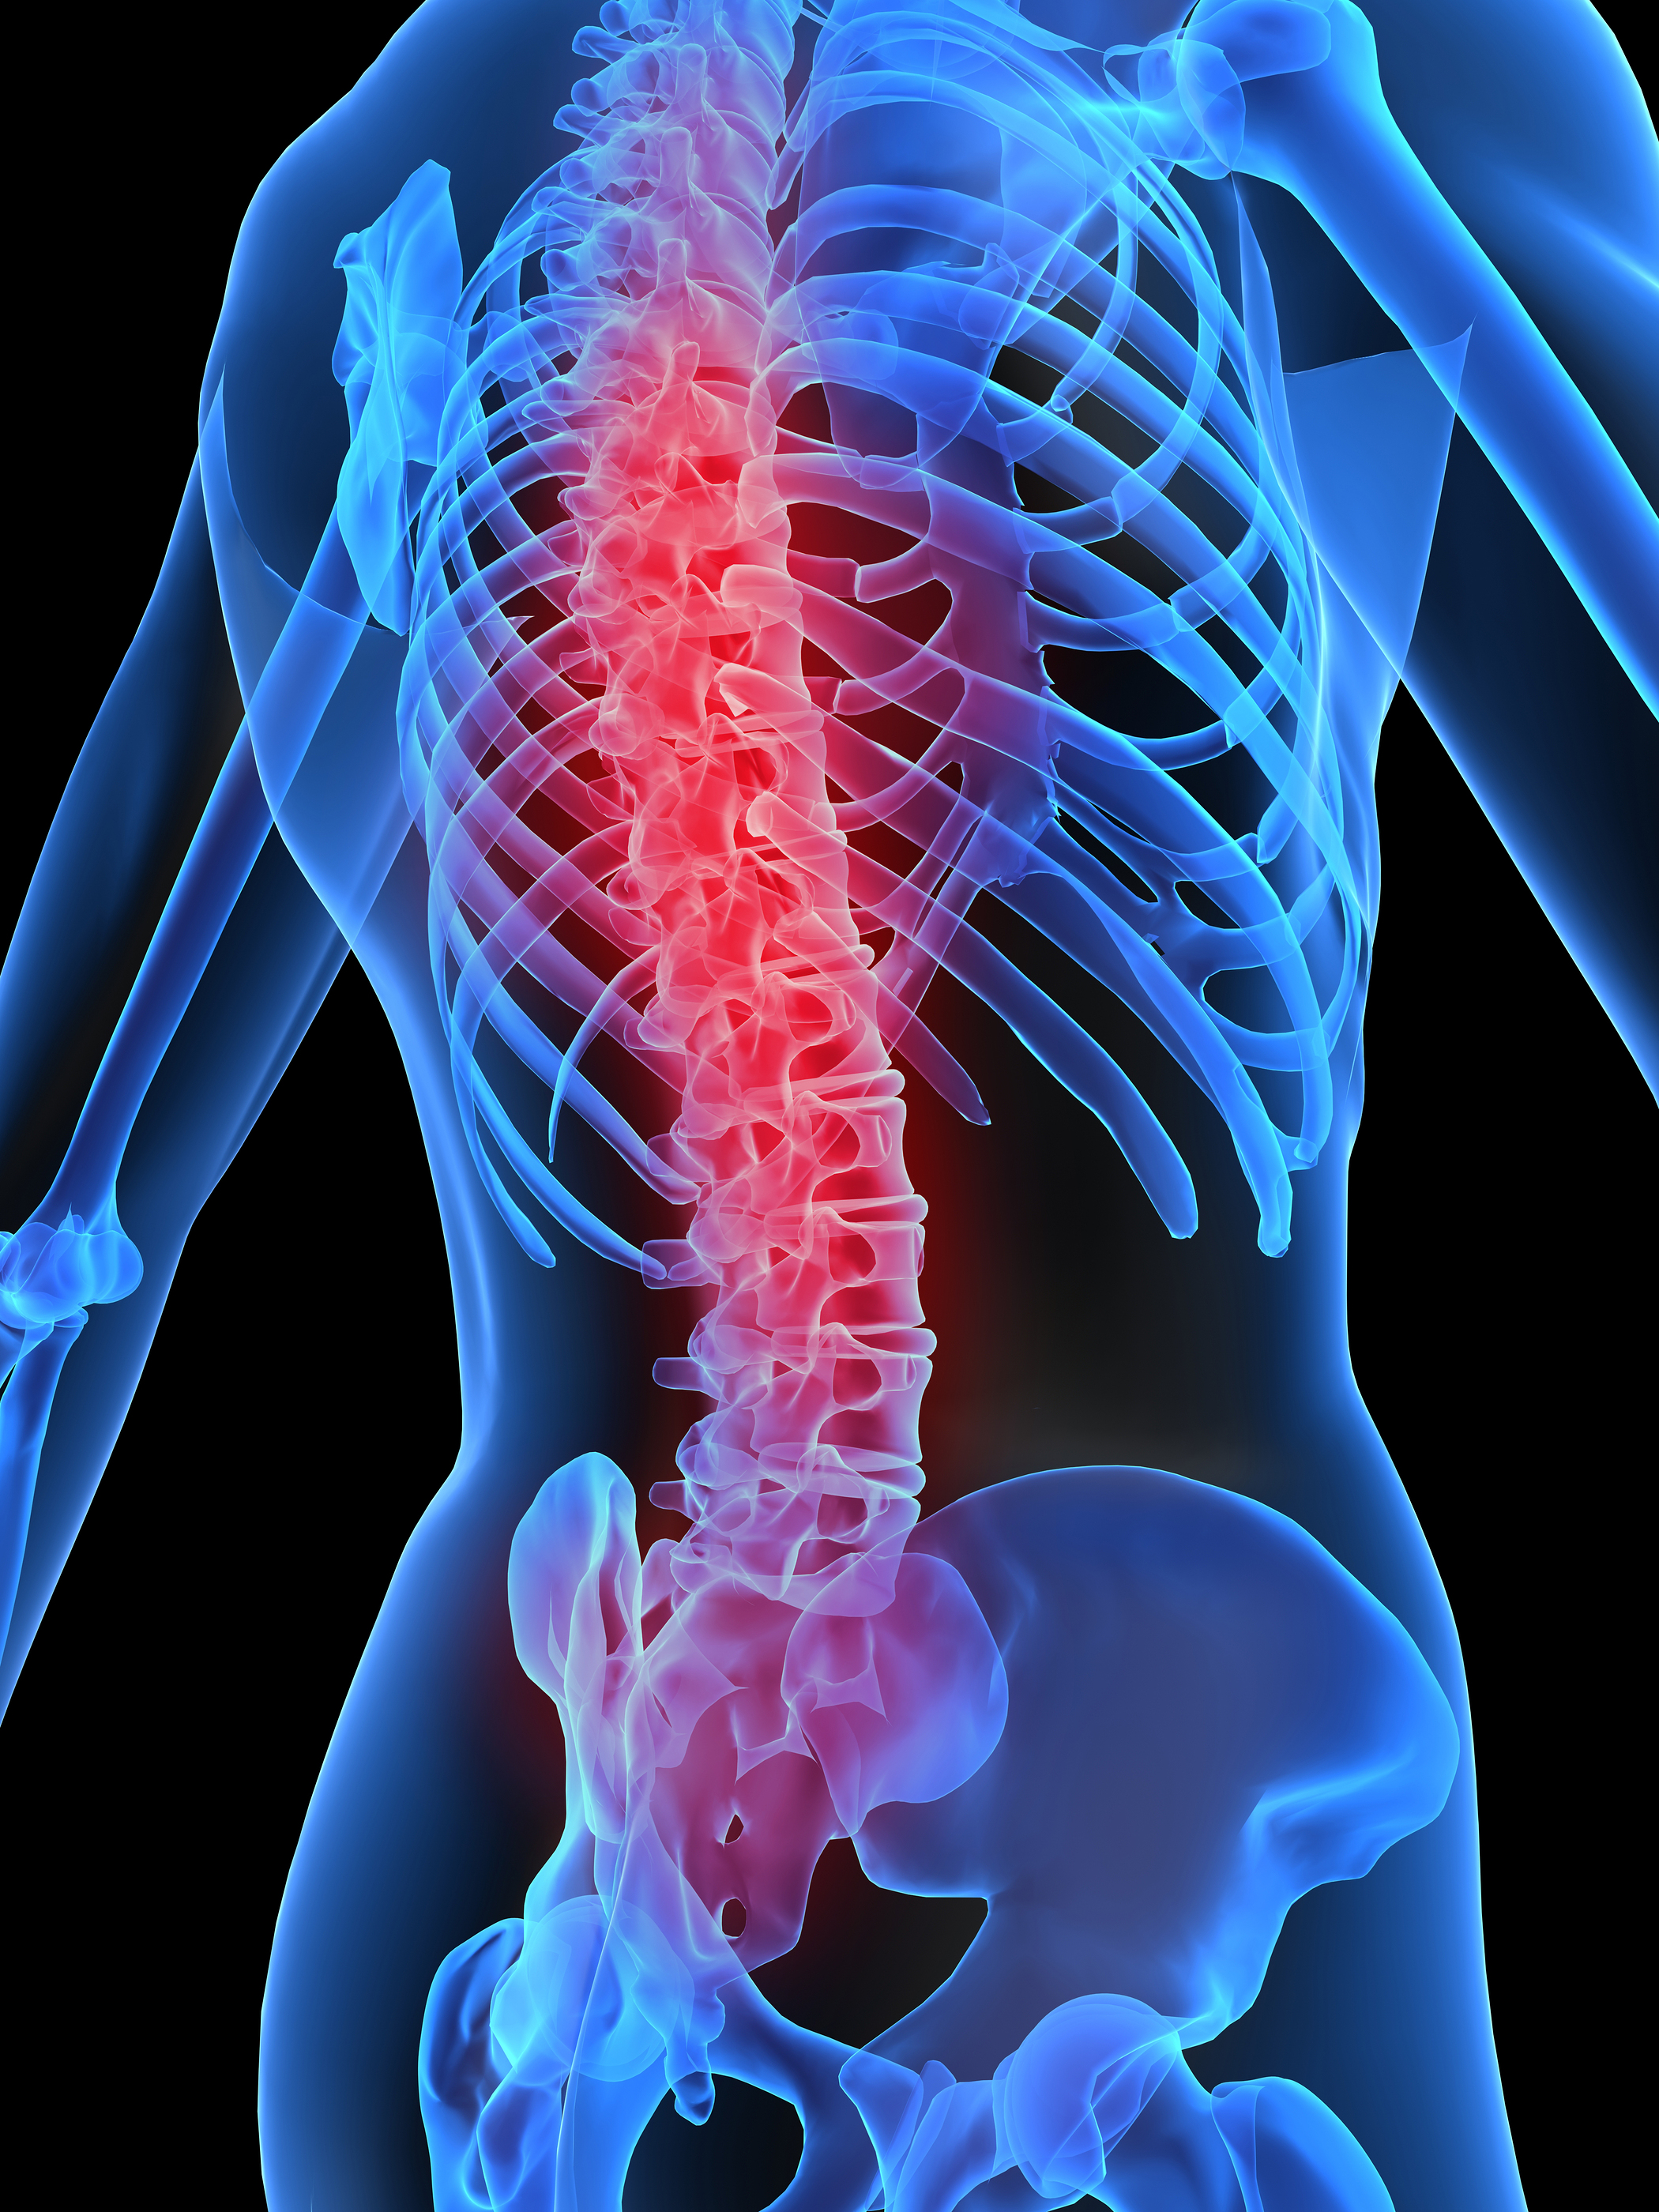 Treating Neck and Back Pain After an Accident